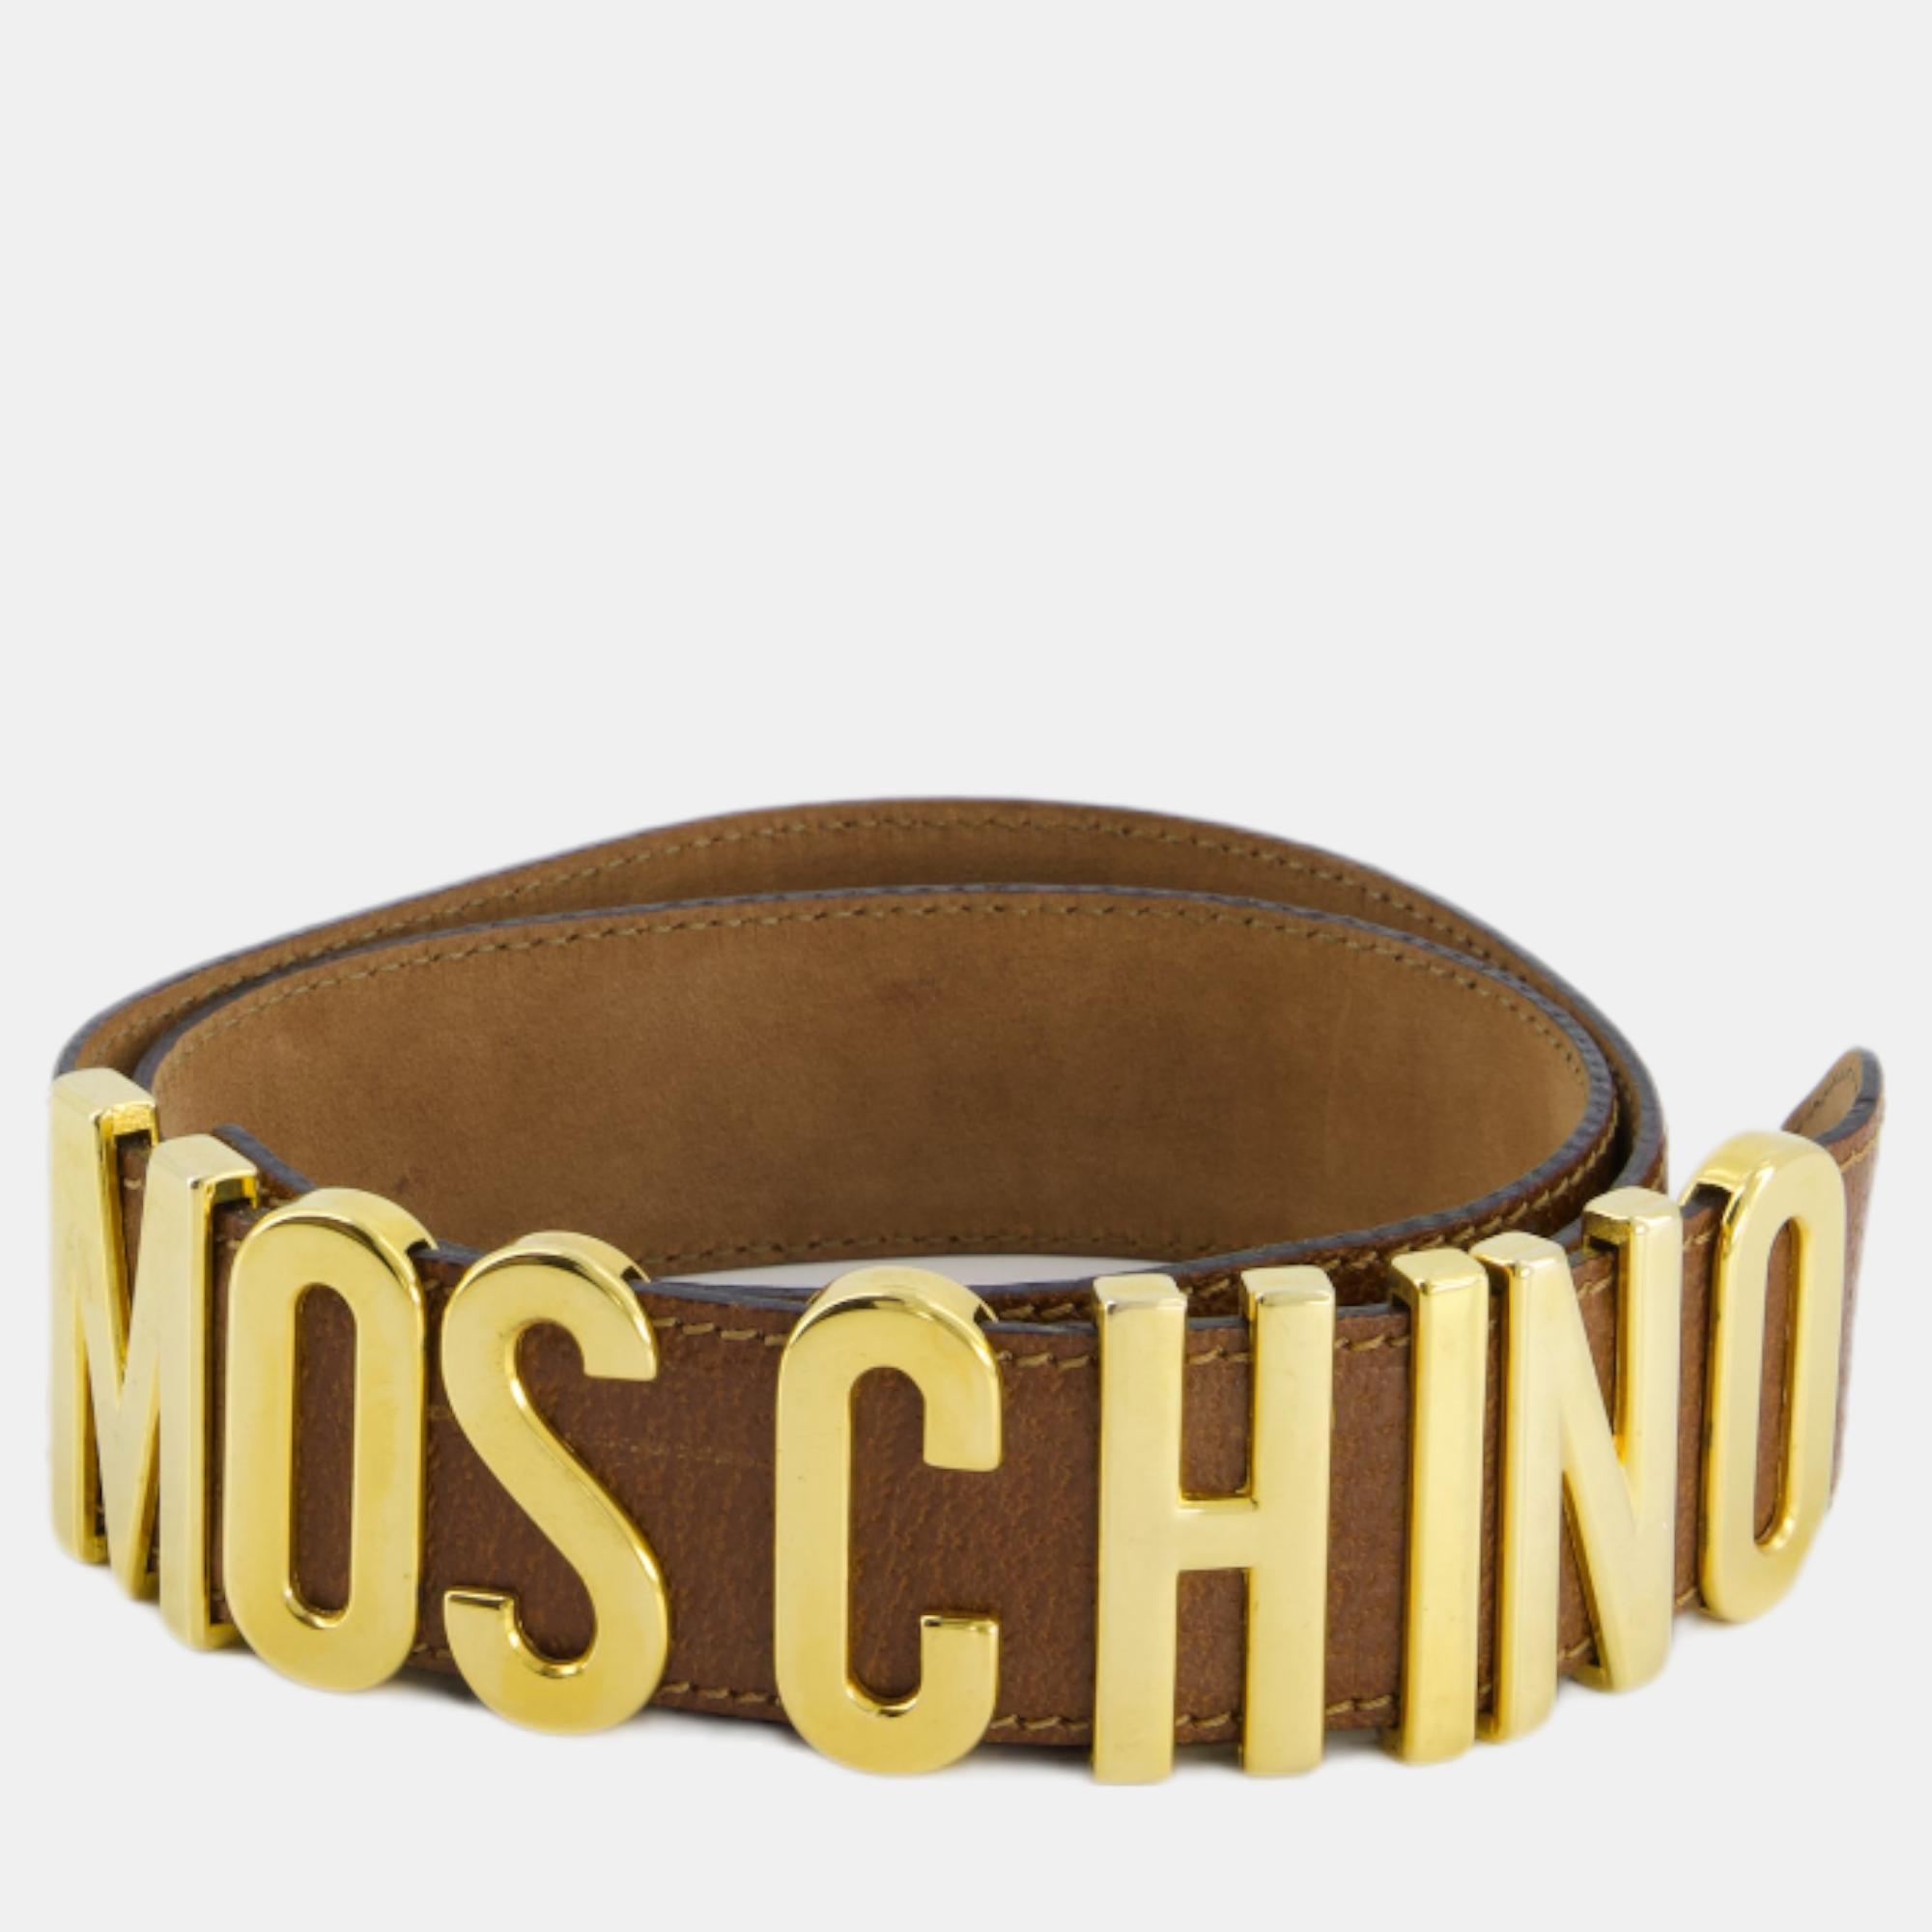 Belt Buckles Moschino Brown Leather Logo Belt with Gold Hardware Size 44 (UK 12)